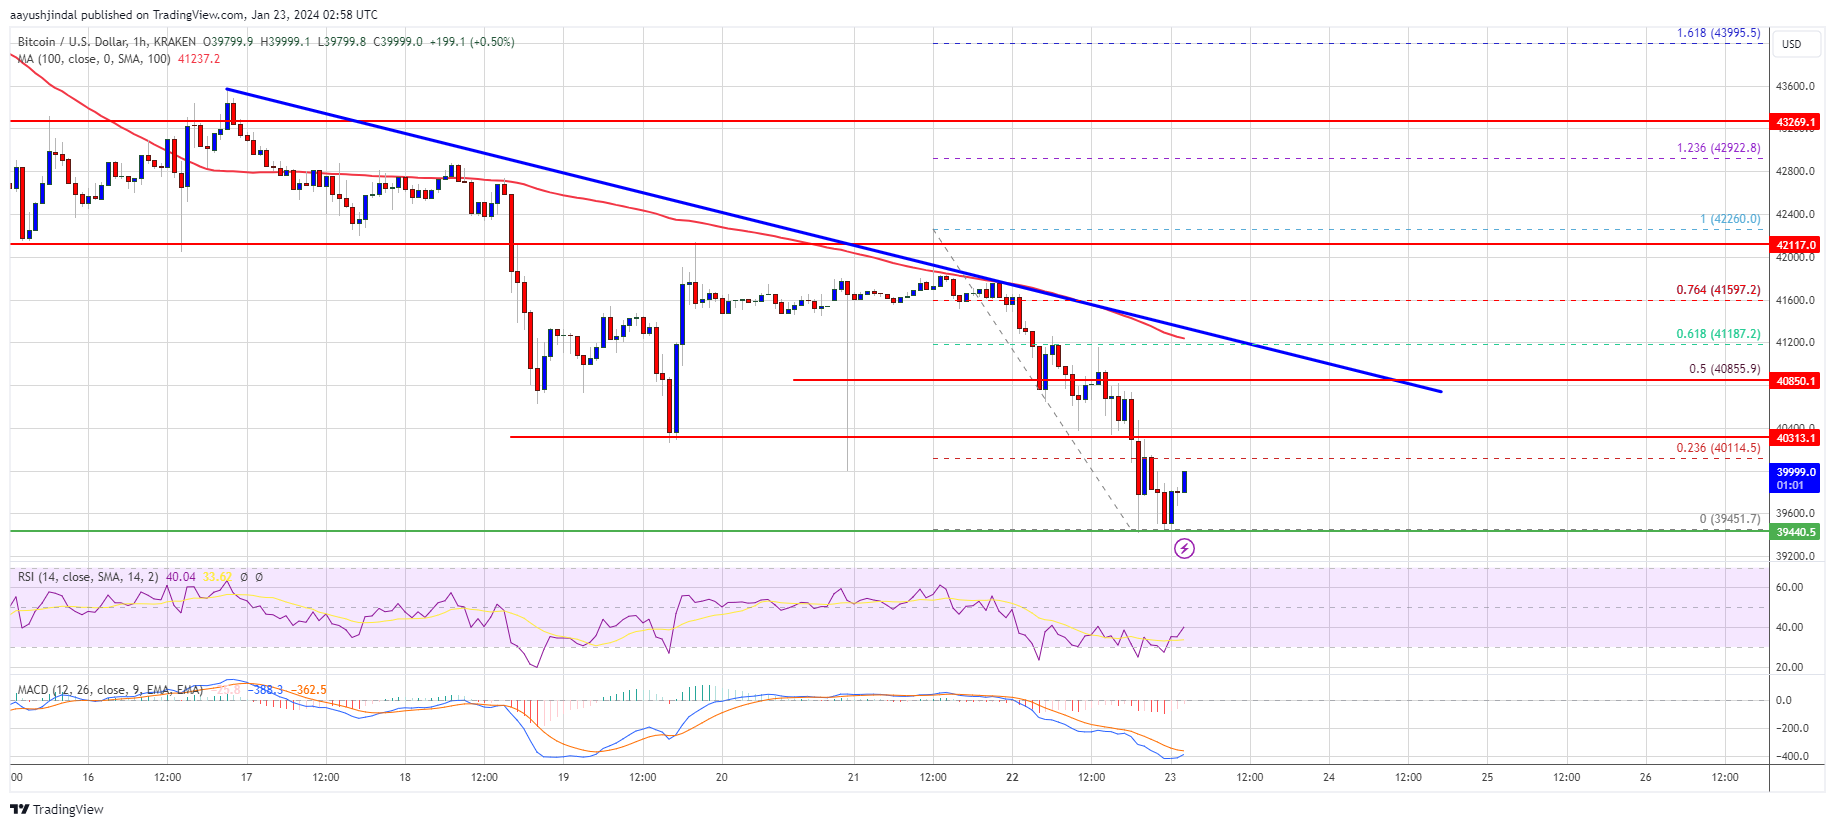 Bitcoin Price Dives Below $40K, Can Bulls Save The Day?